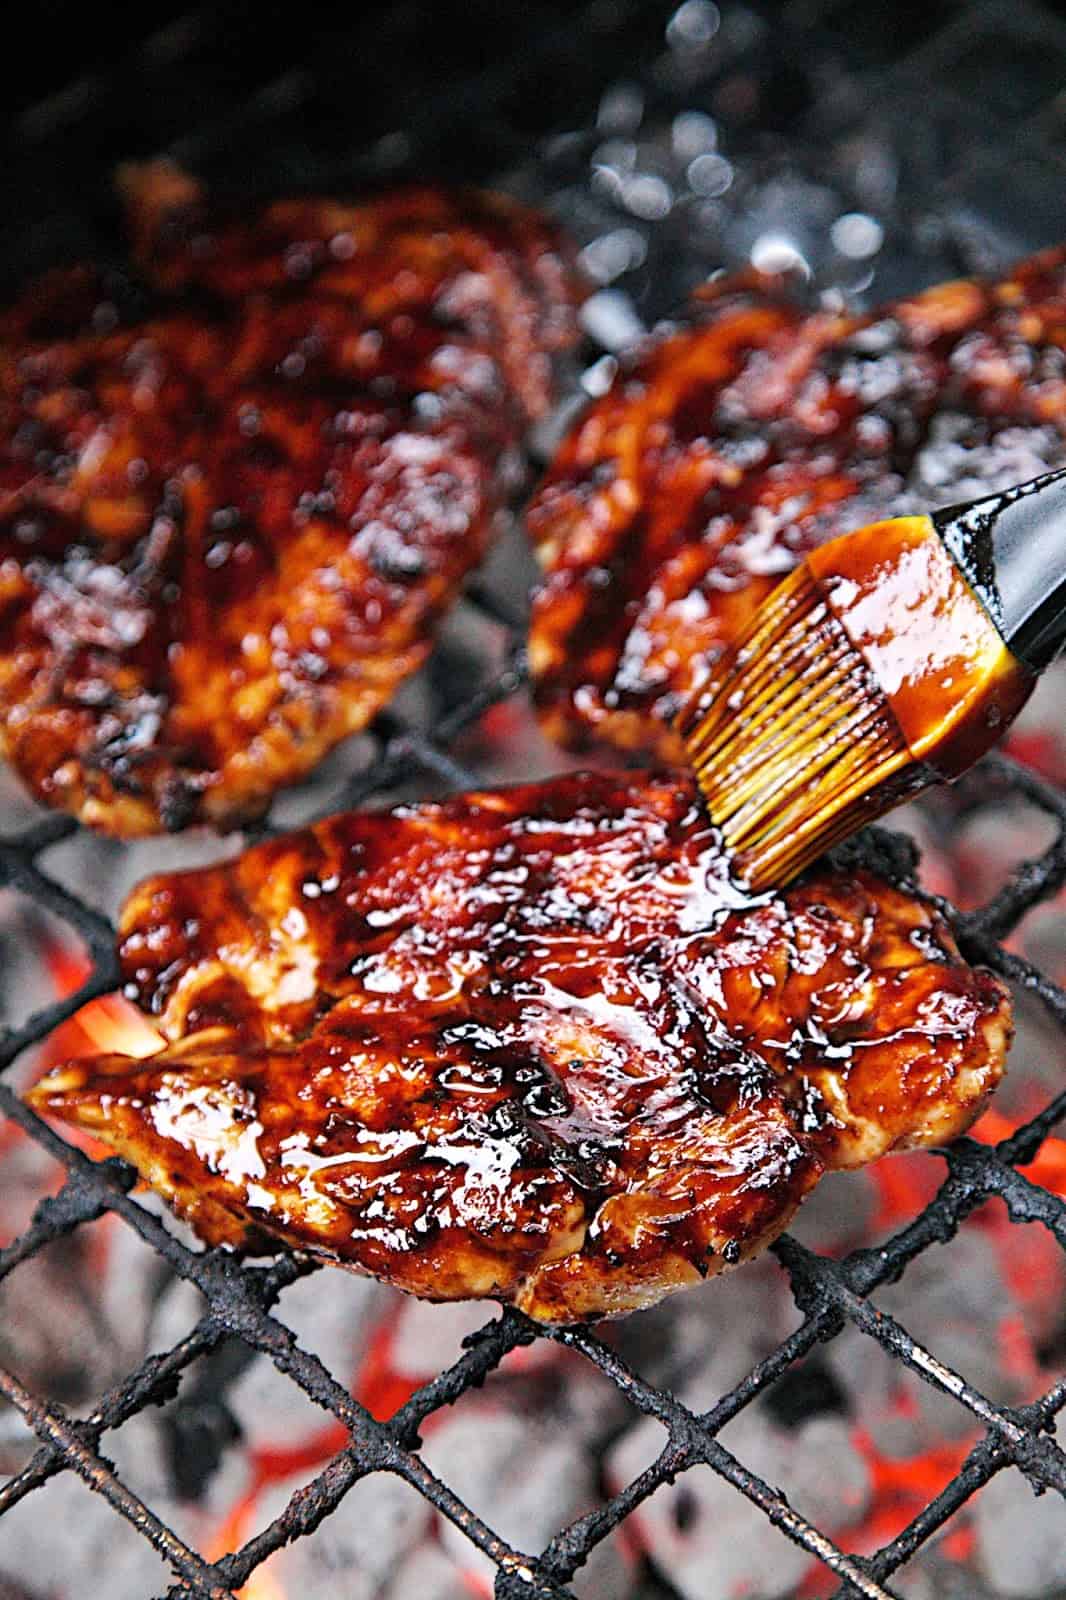 Balsamic BBQ Sauce Recipe - balsamic vinegar, ketchup, brown sugar, garlic, Worcestershire, Dijon mustard - make an amazing sauce with a hint of sweetness once reduced. Great on chicken or pork. We gobbled this up!!